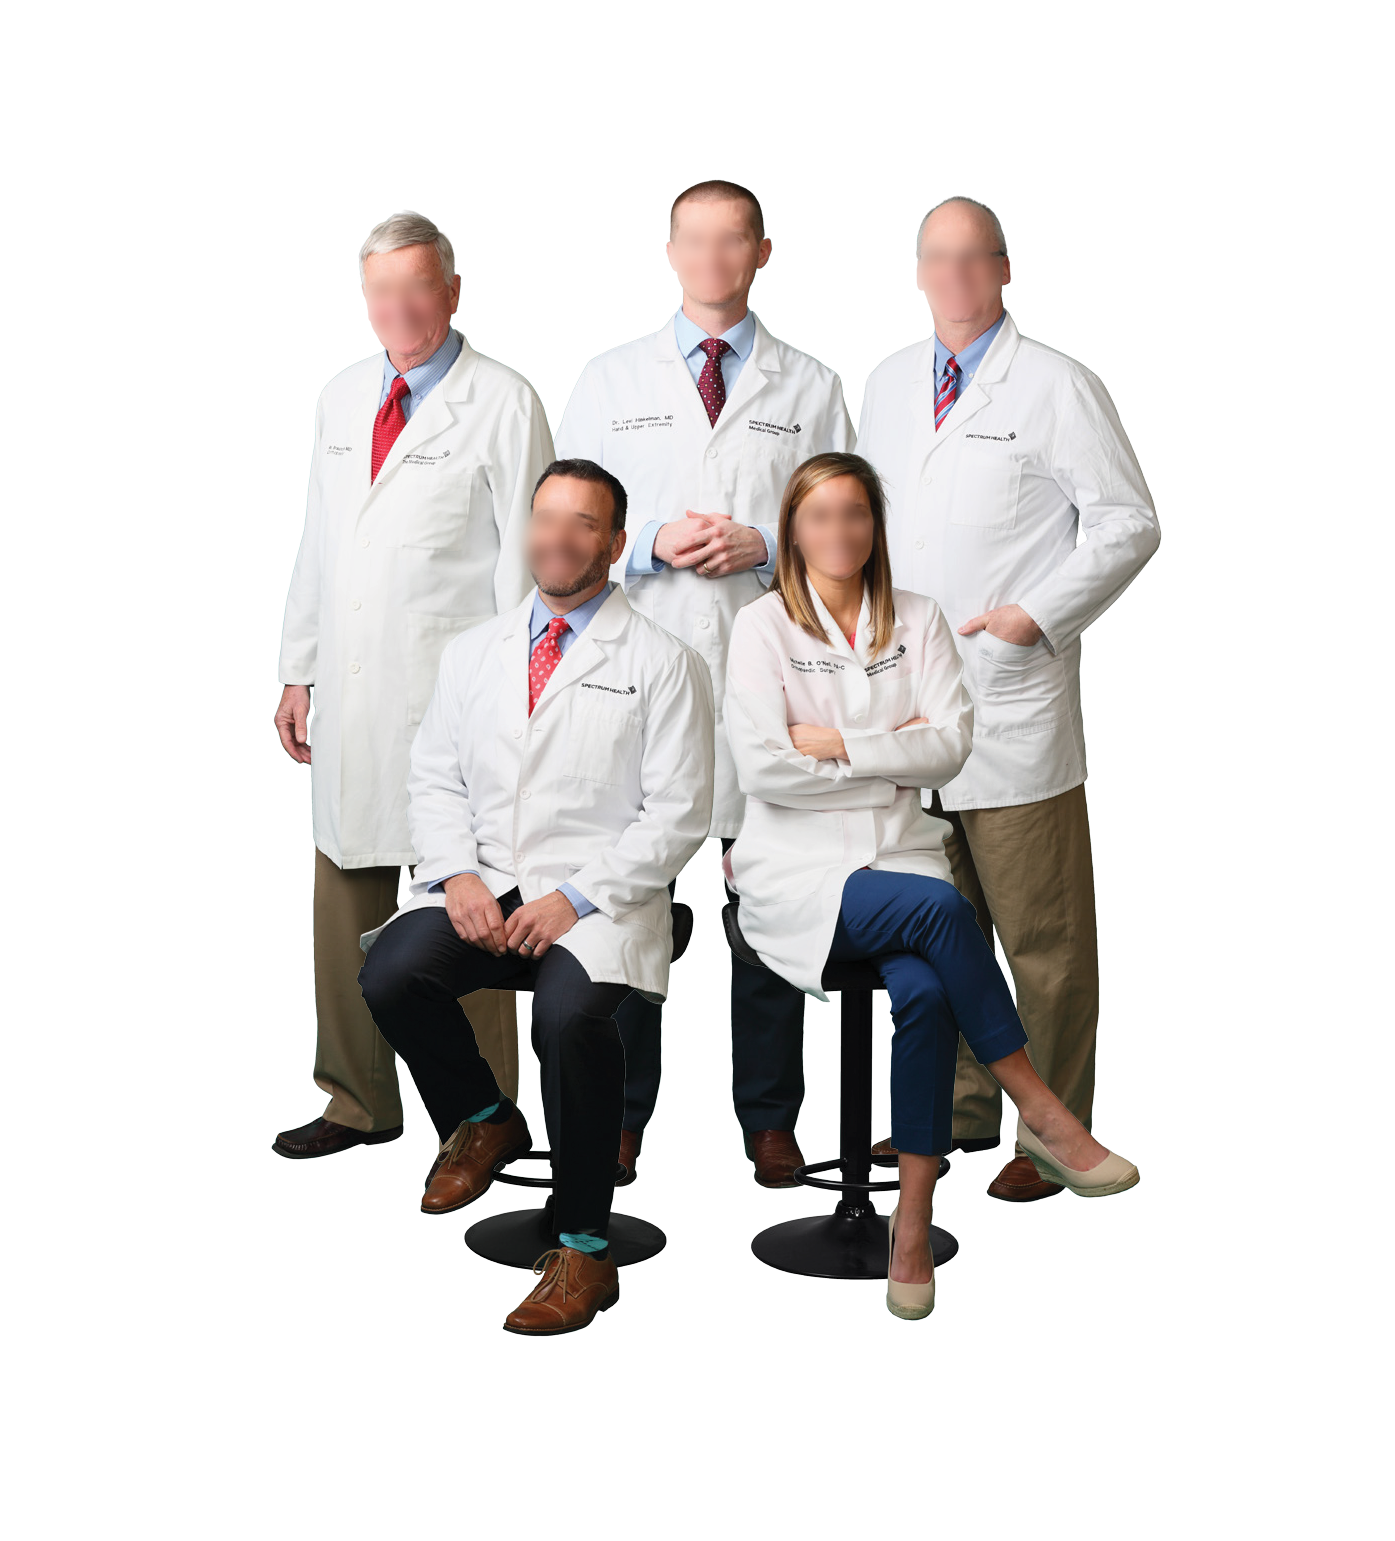 17.52.9.F - Group Images of Orthopedics Teams - Without Names-3.png